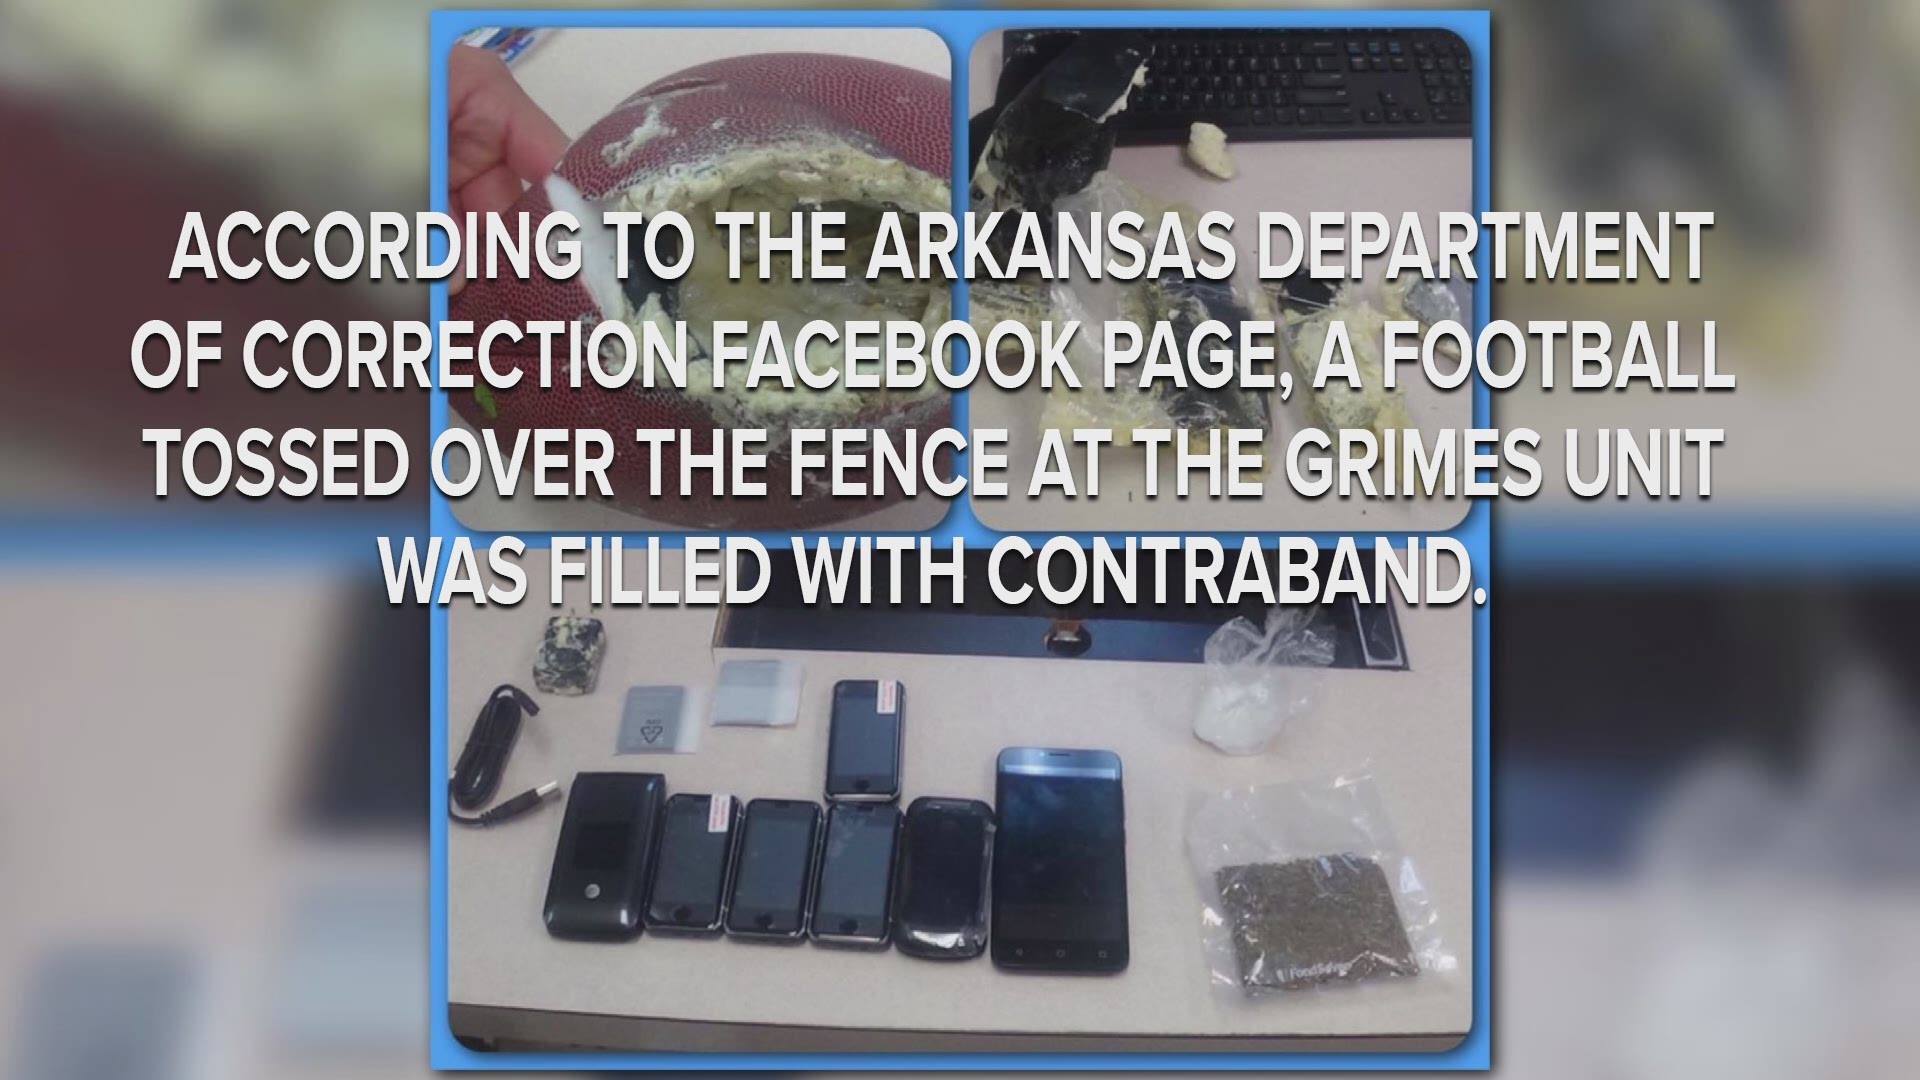 The post says, "Fighting contraband is a non-stop battle." The football held cell phones and two types of drugs.